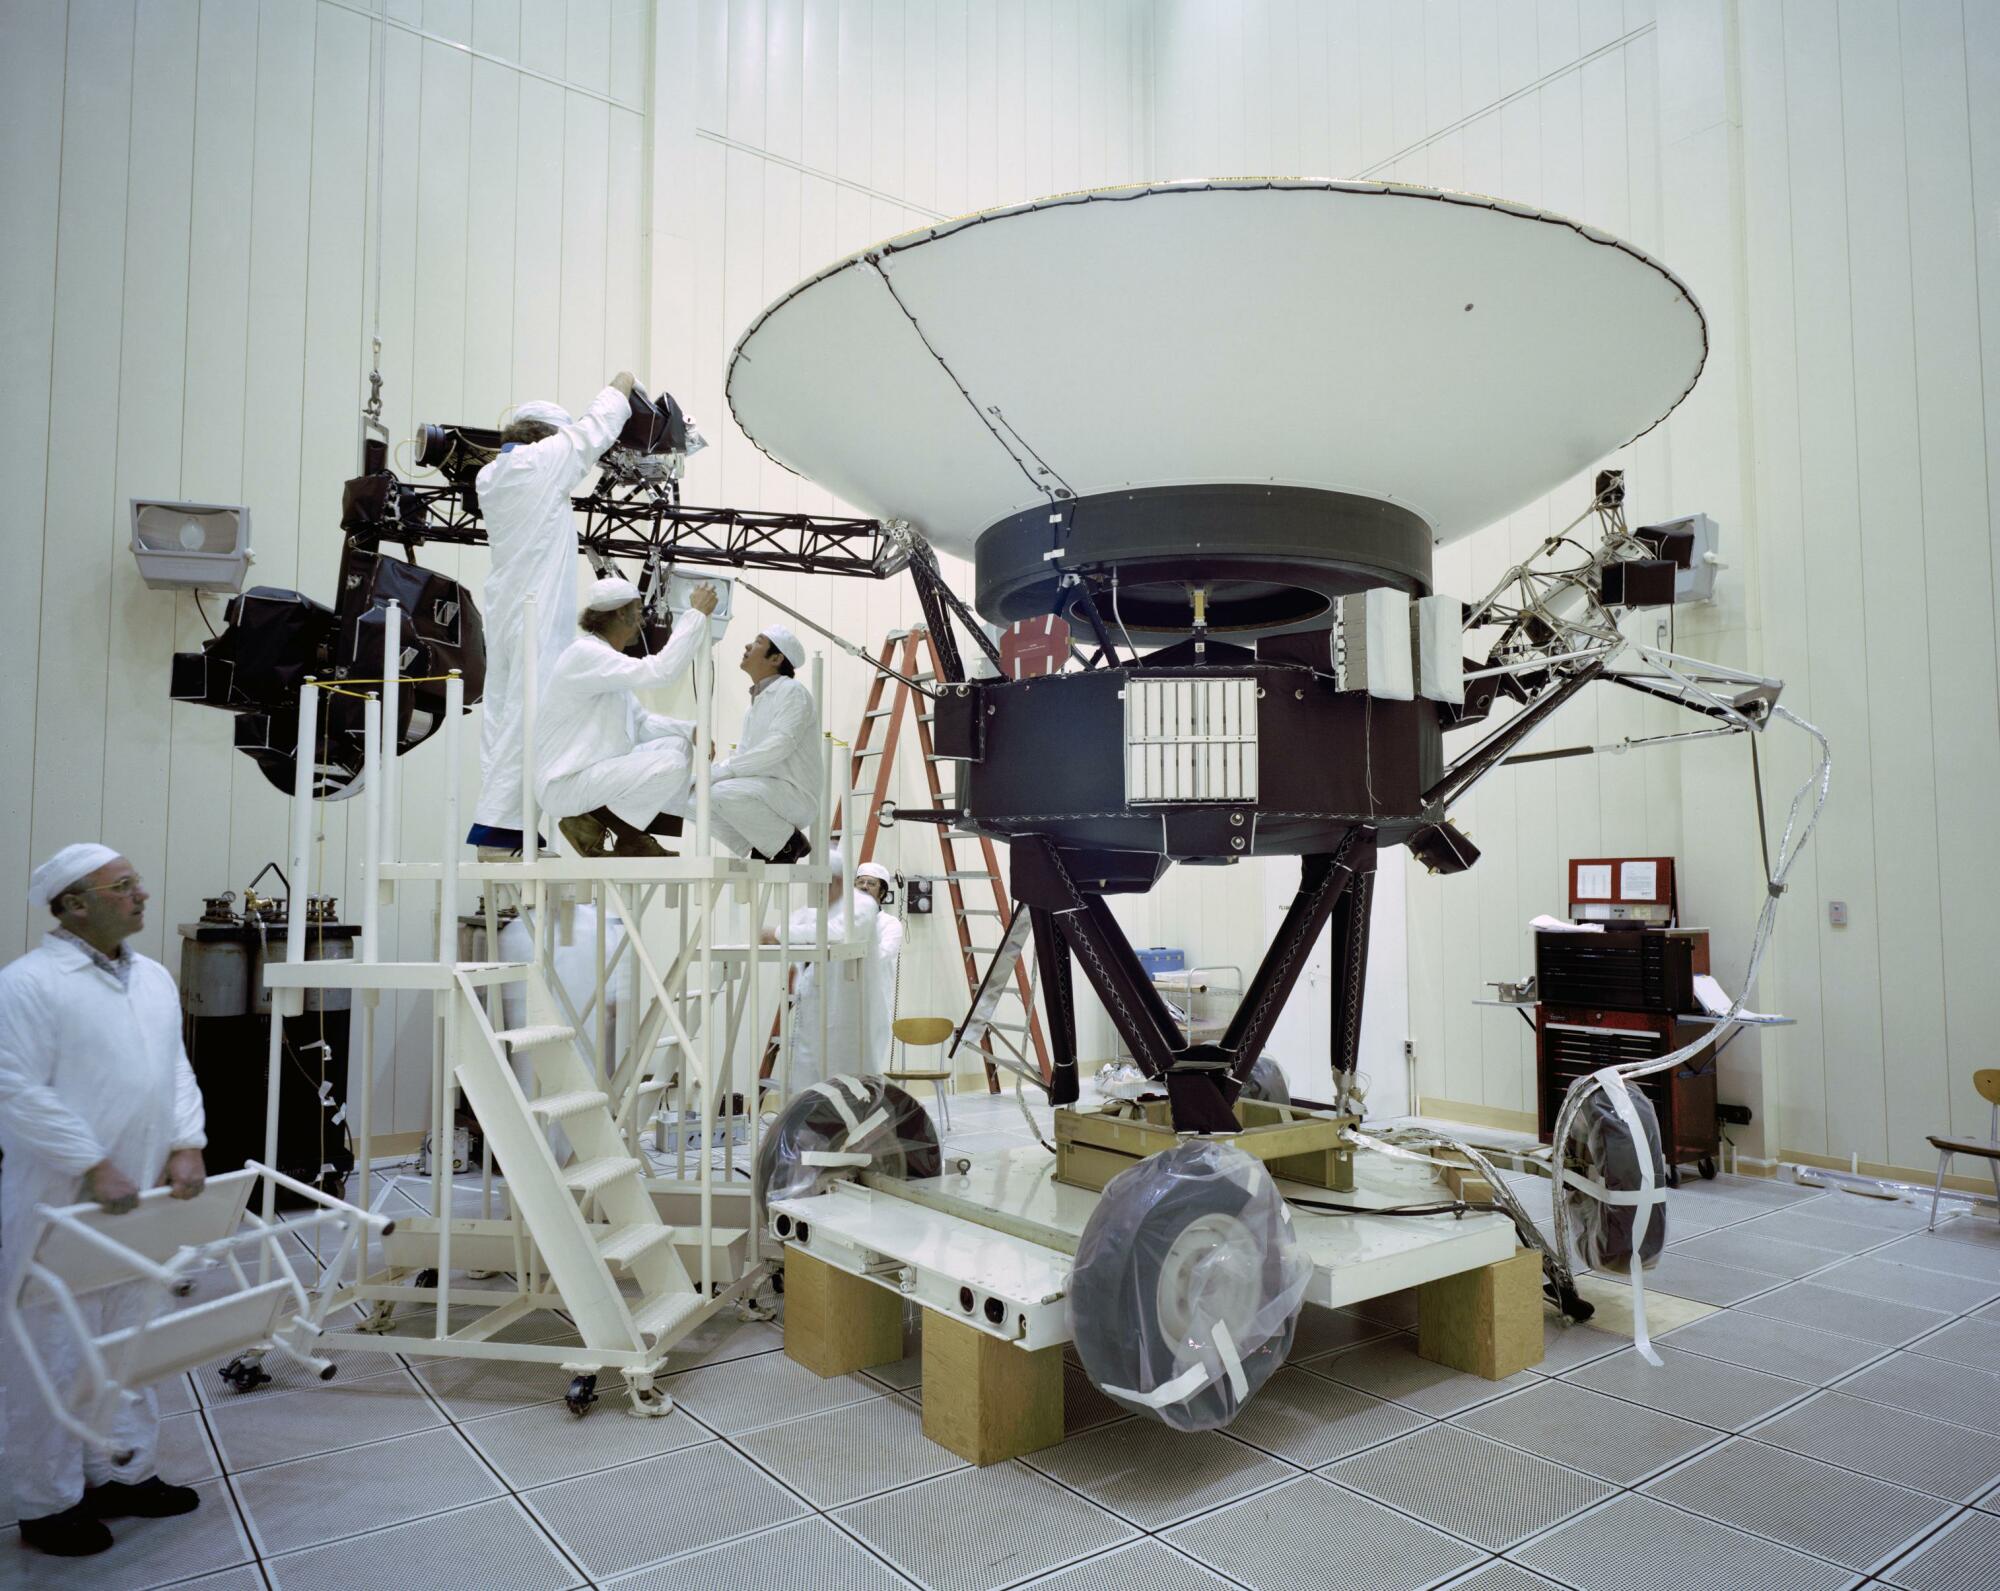 NASA engineers working on the Voyager 2 spacecraft in 1977.